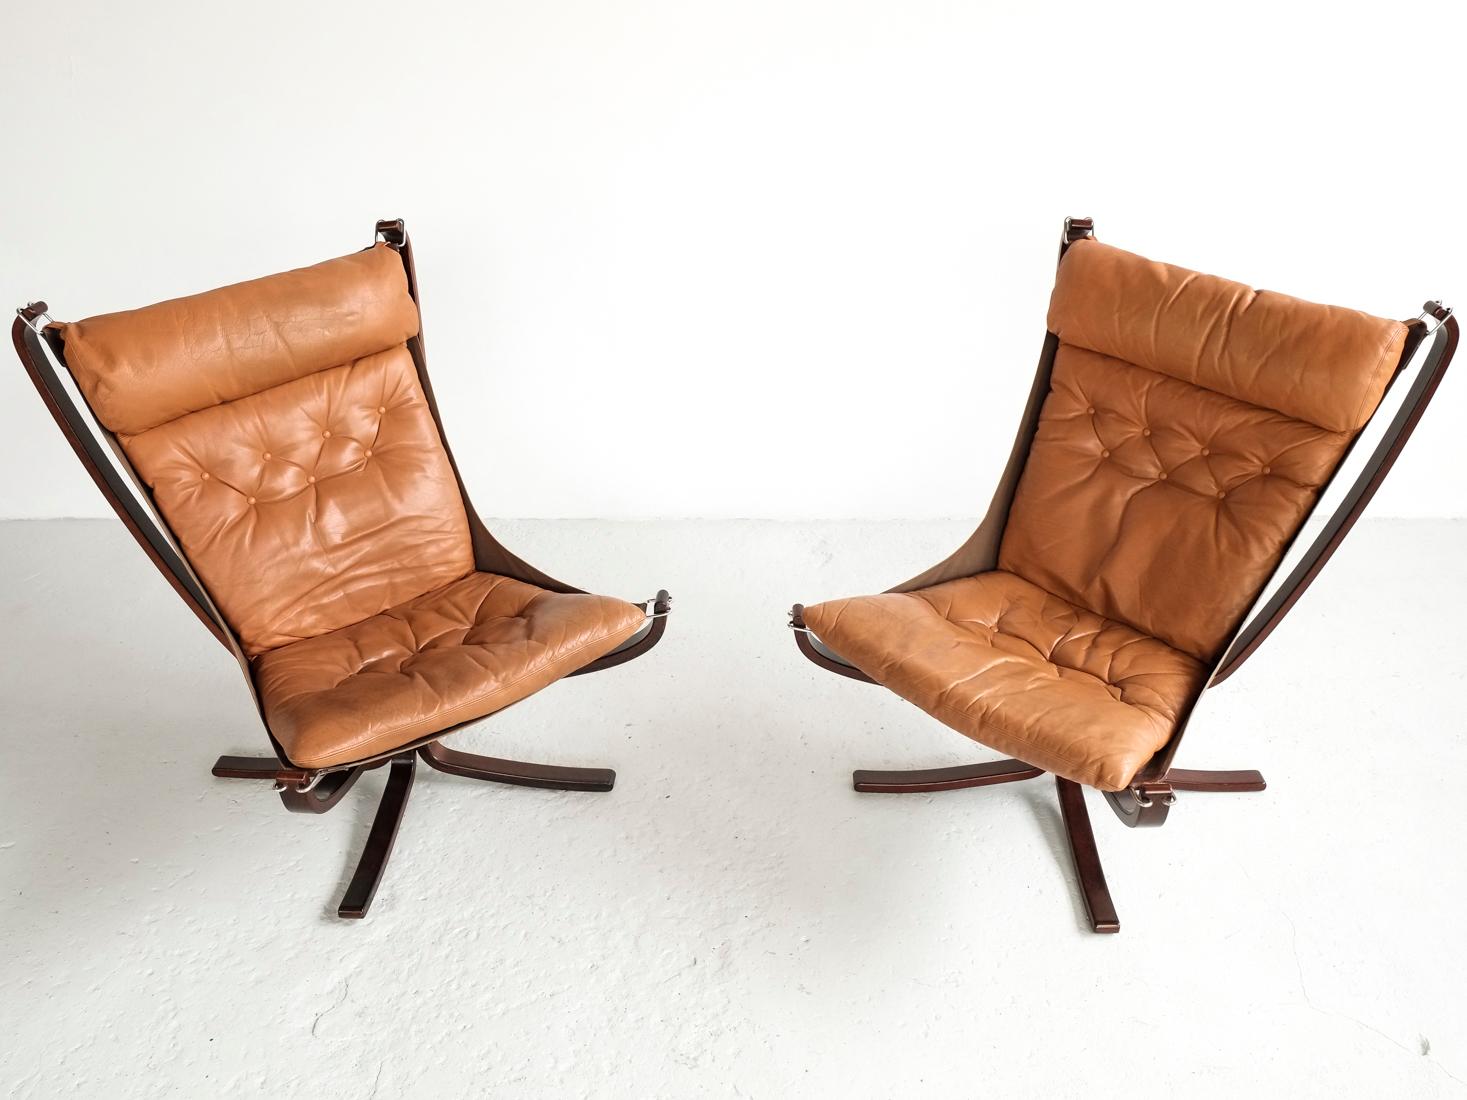 20th Century Midcentury Pair of High-Back Falcon Chairs by Sigurd Ressell for Vatne Møbler